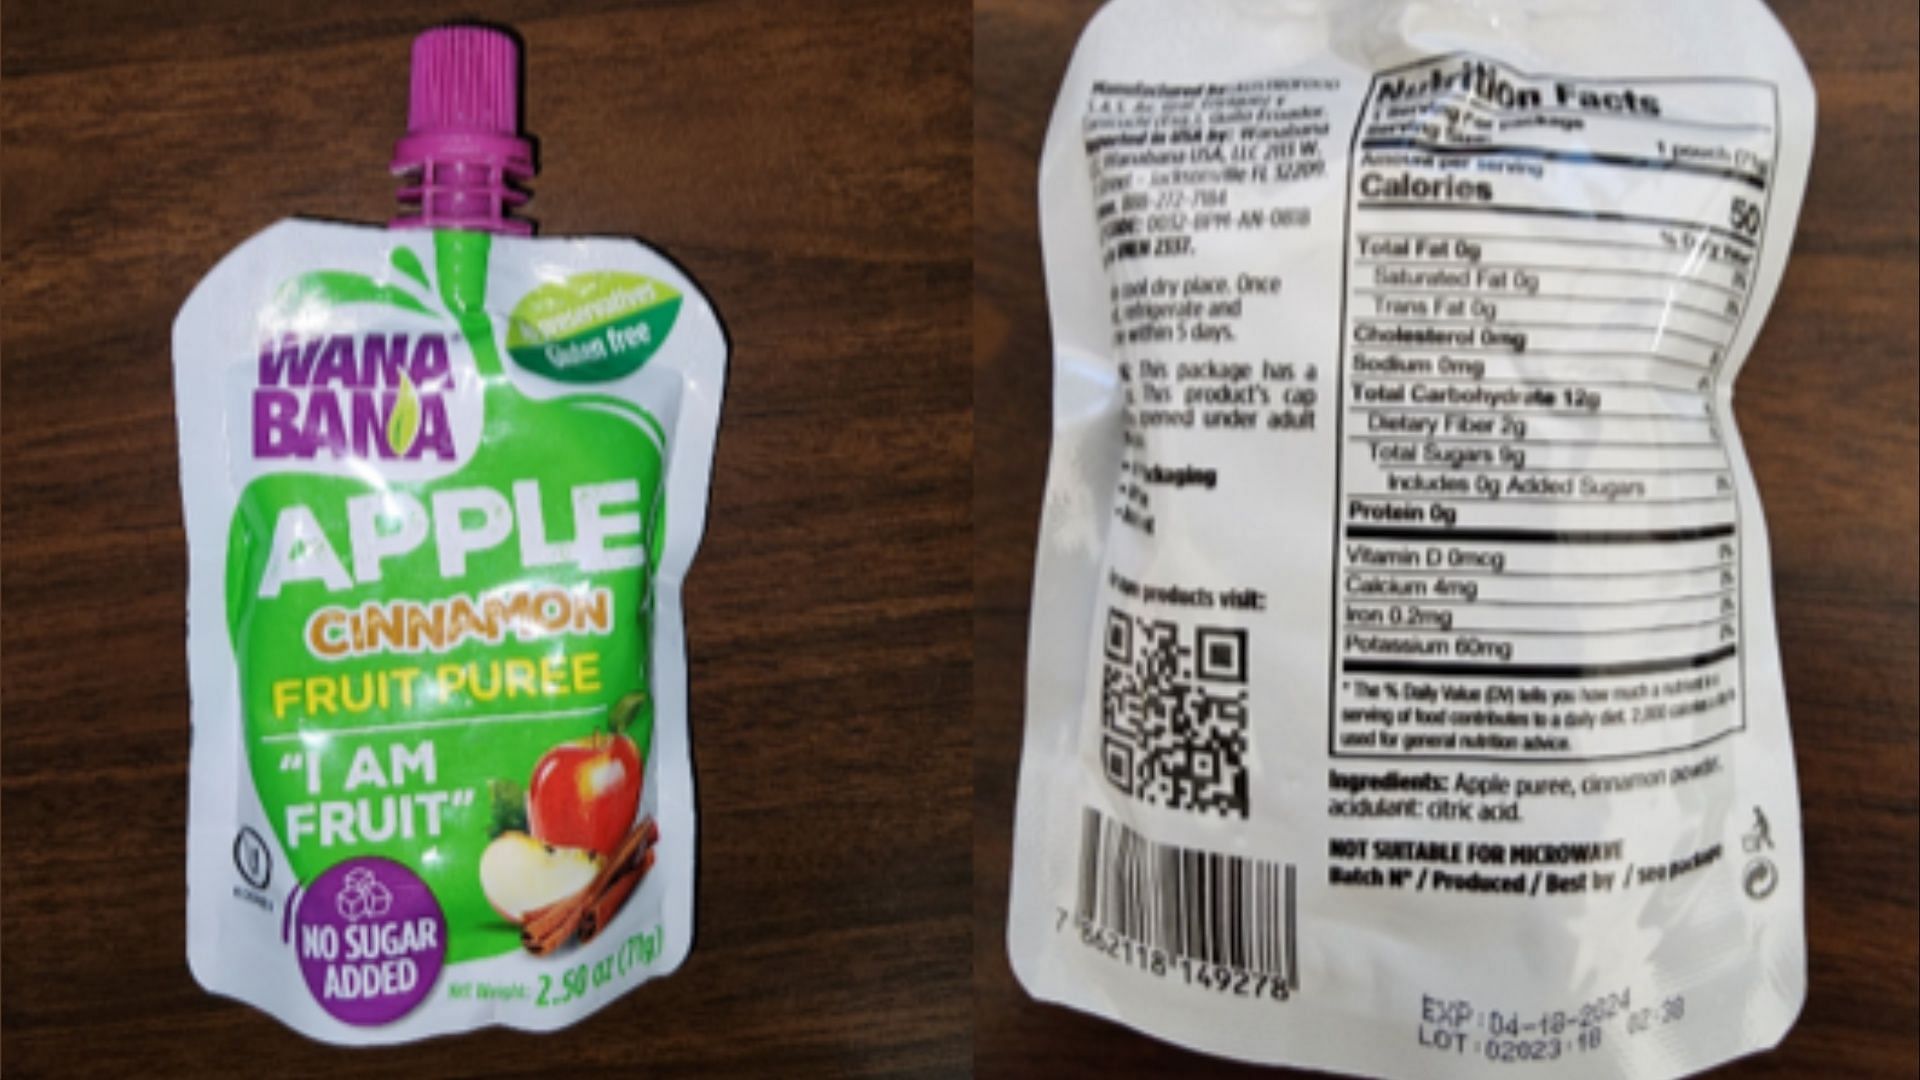 The affected WanaBana Apple Cinnamon Fruit Puree Pouches are also being recalled from across the country (Image via FDA)